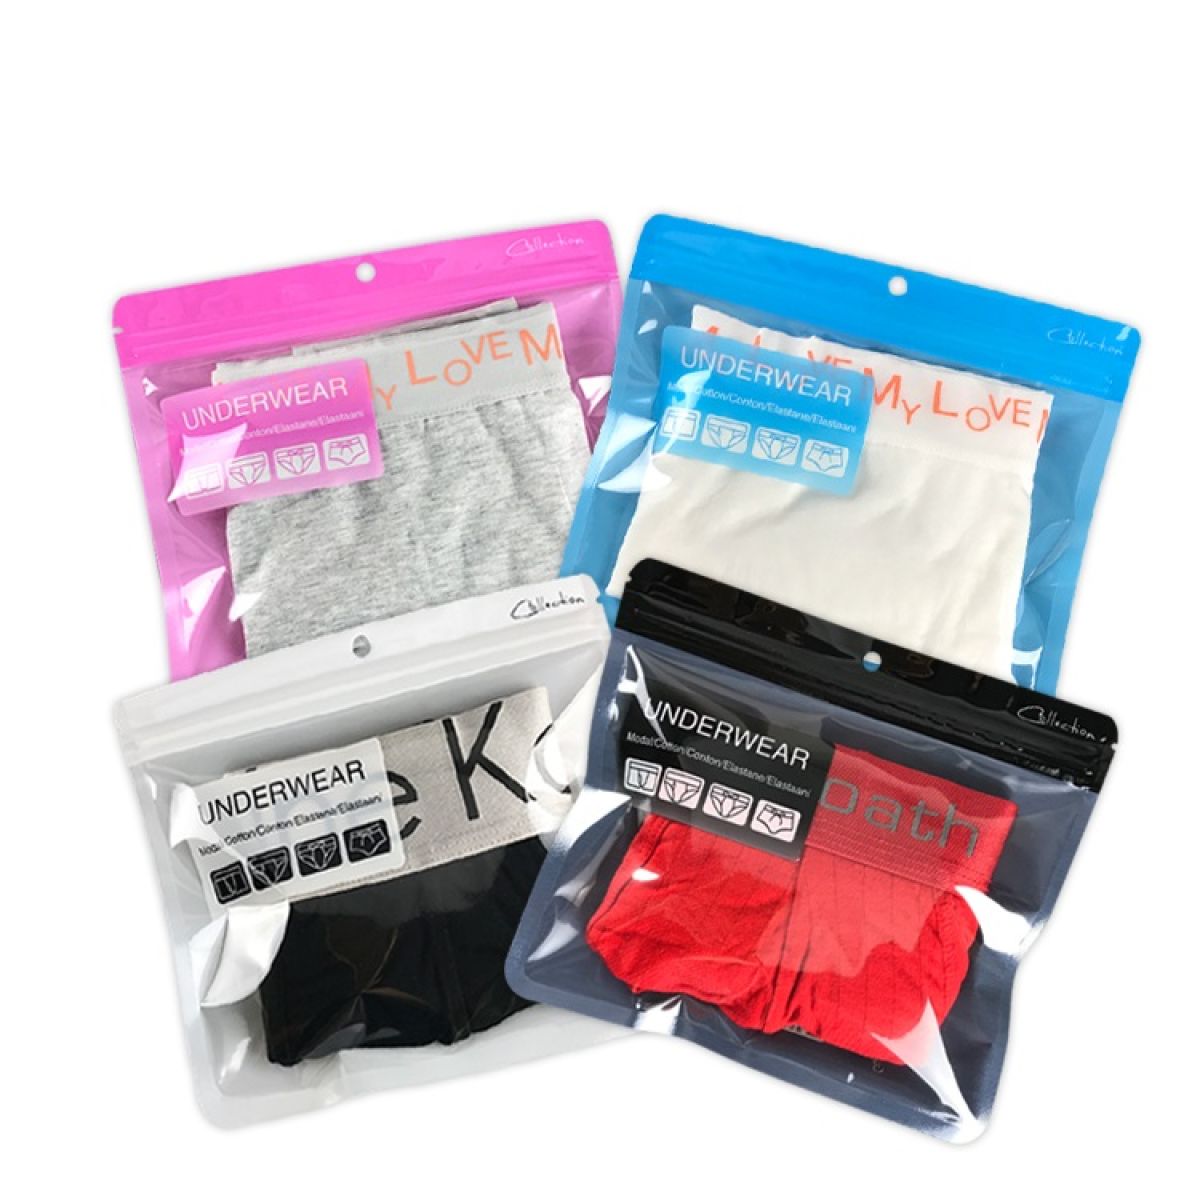 HOW DIVERSE ARE THE CURRENT PLASTIC PACKAGING BAGS FOR UNDERWEAR PRODUCTS?